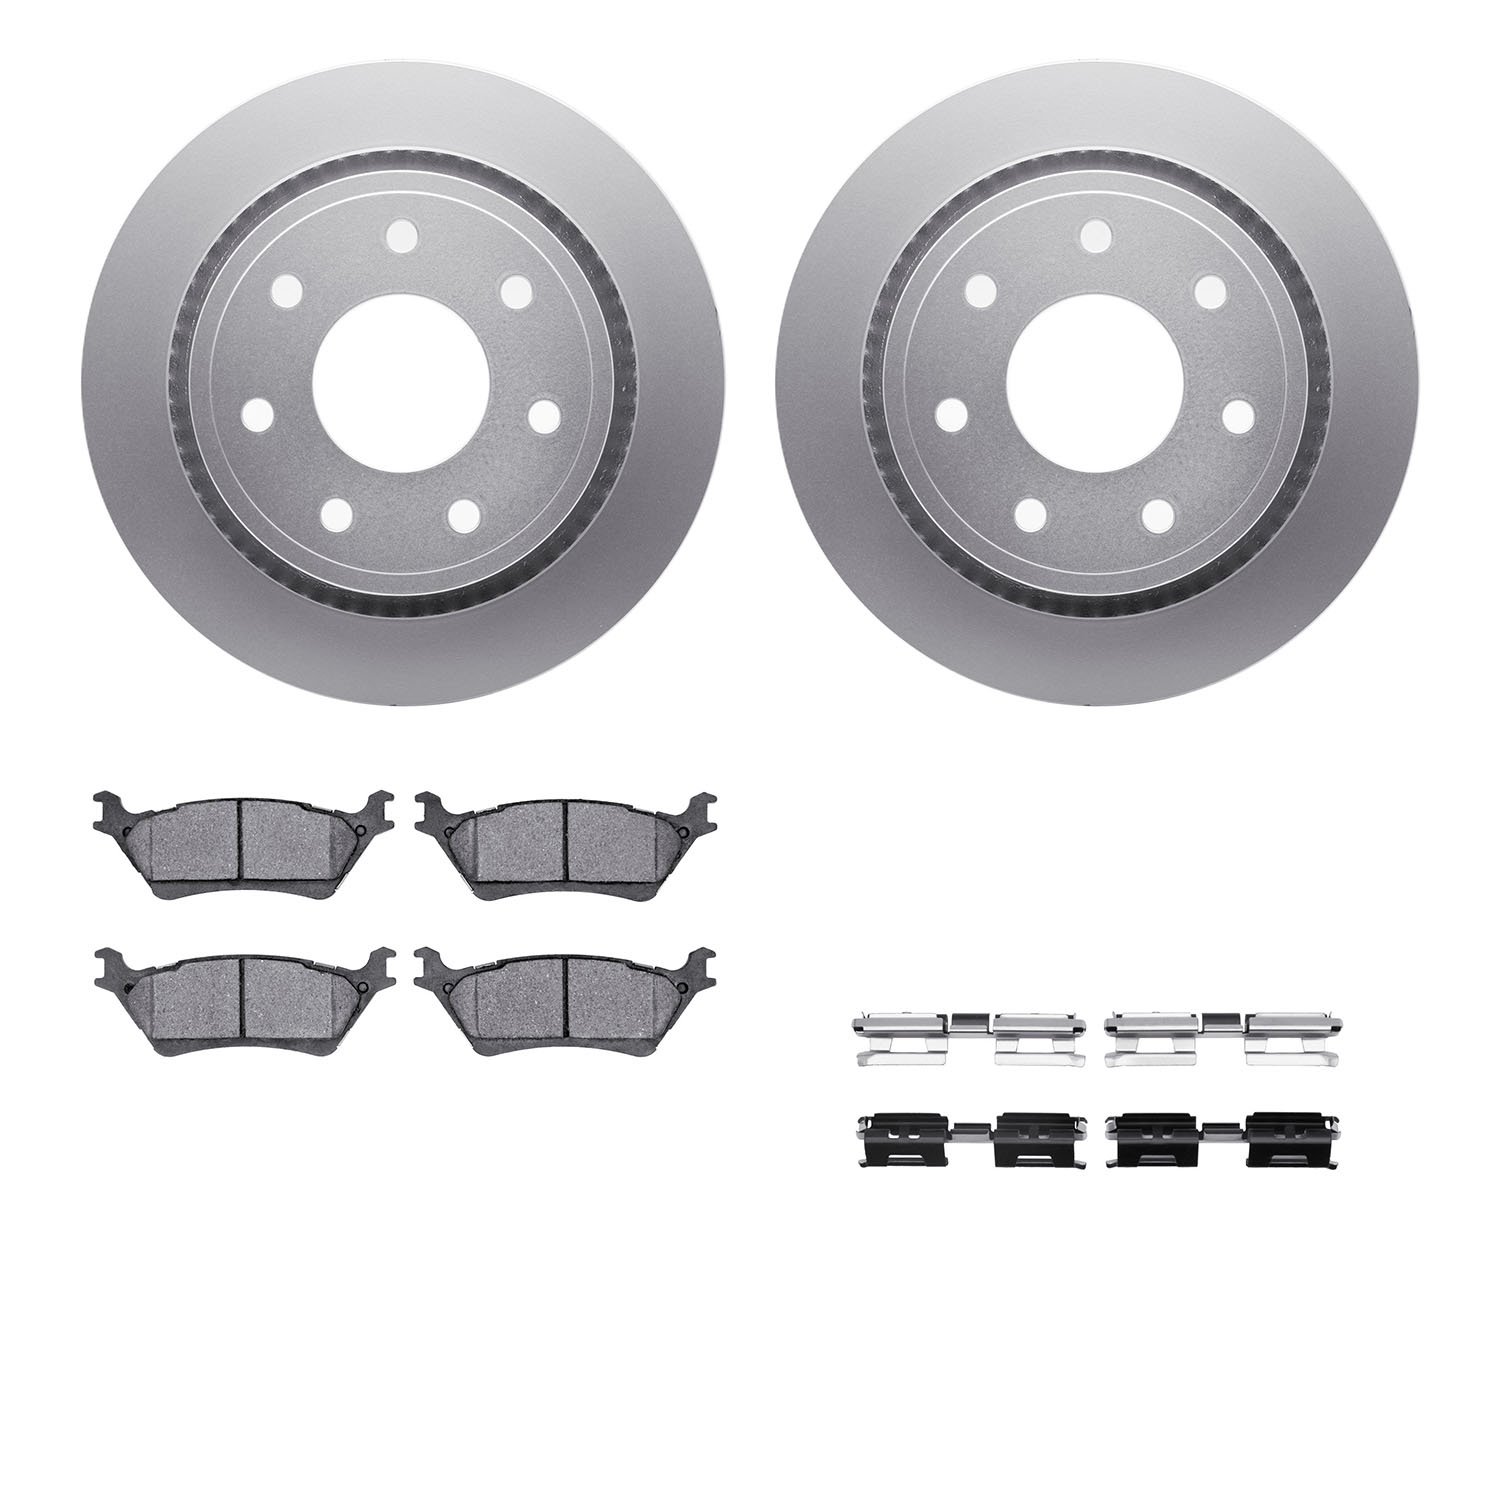 4412-54069 Geospec Brake Rotors with Ultimate-Duty Brake Pads & Hardware, 2012-2014 Ford/Lincoln/Mercury/Mazda, Position: Rear